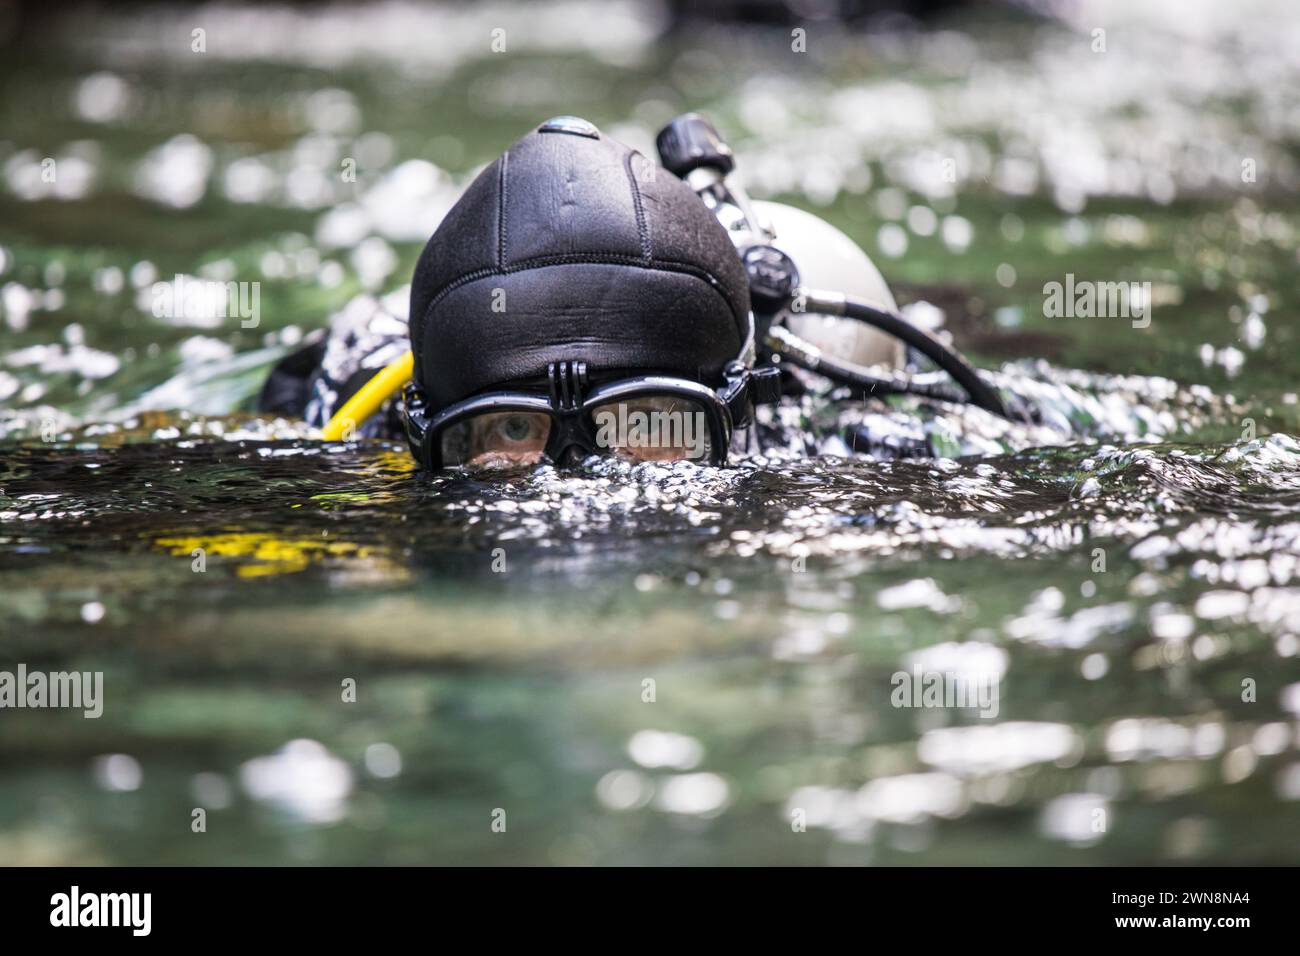 Suba diver surfaces after a dive, goggles protecting eyes Stock Photo